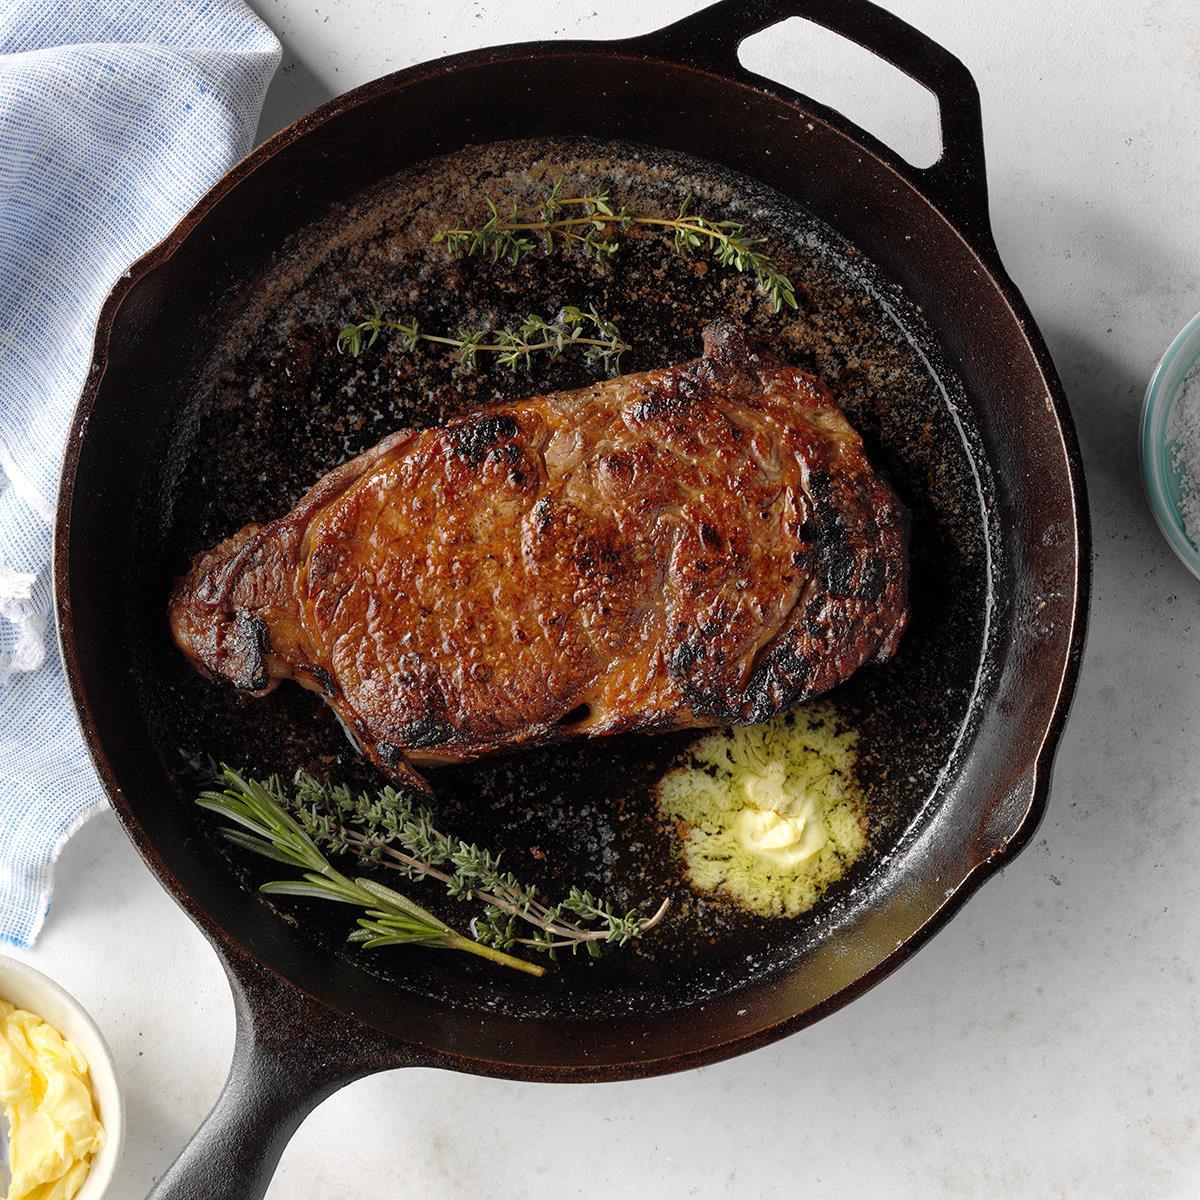 How To Cook Steak Pan Seared With Garlic Butter Cooking Classy